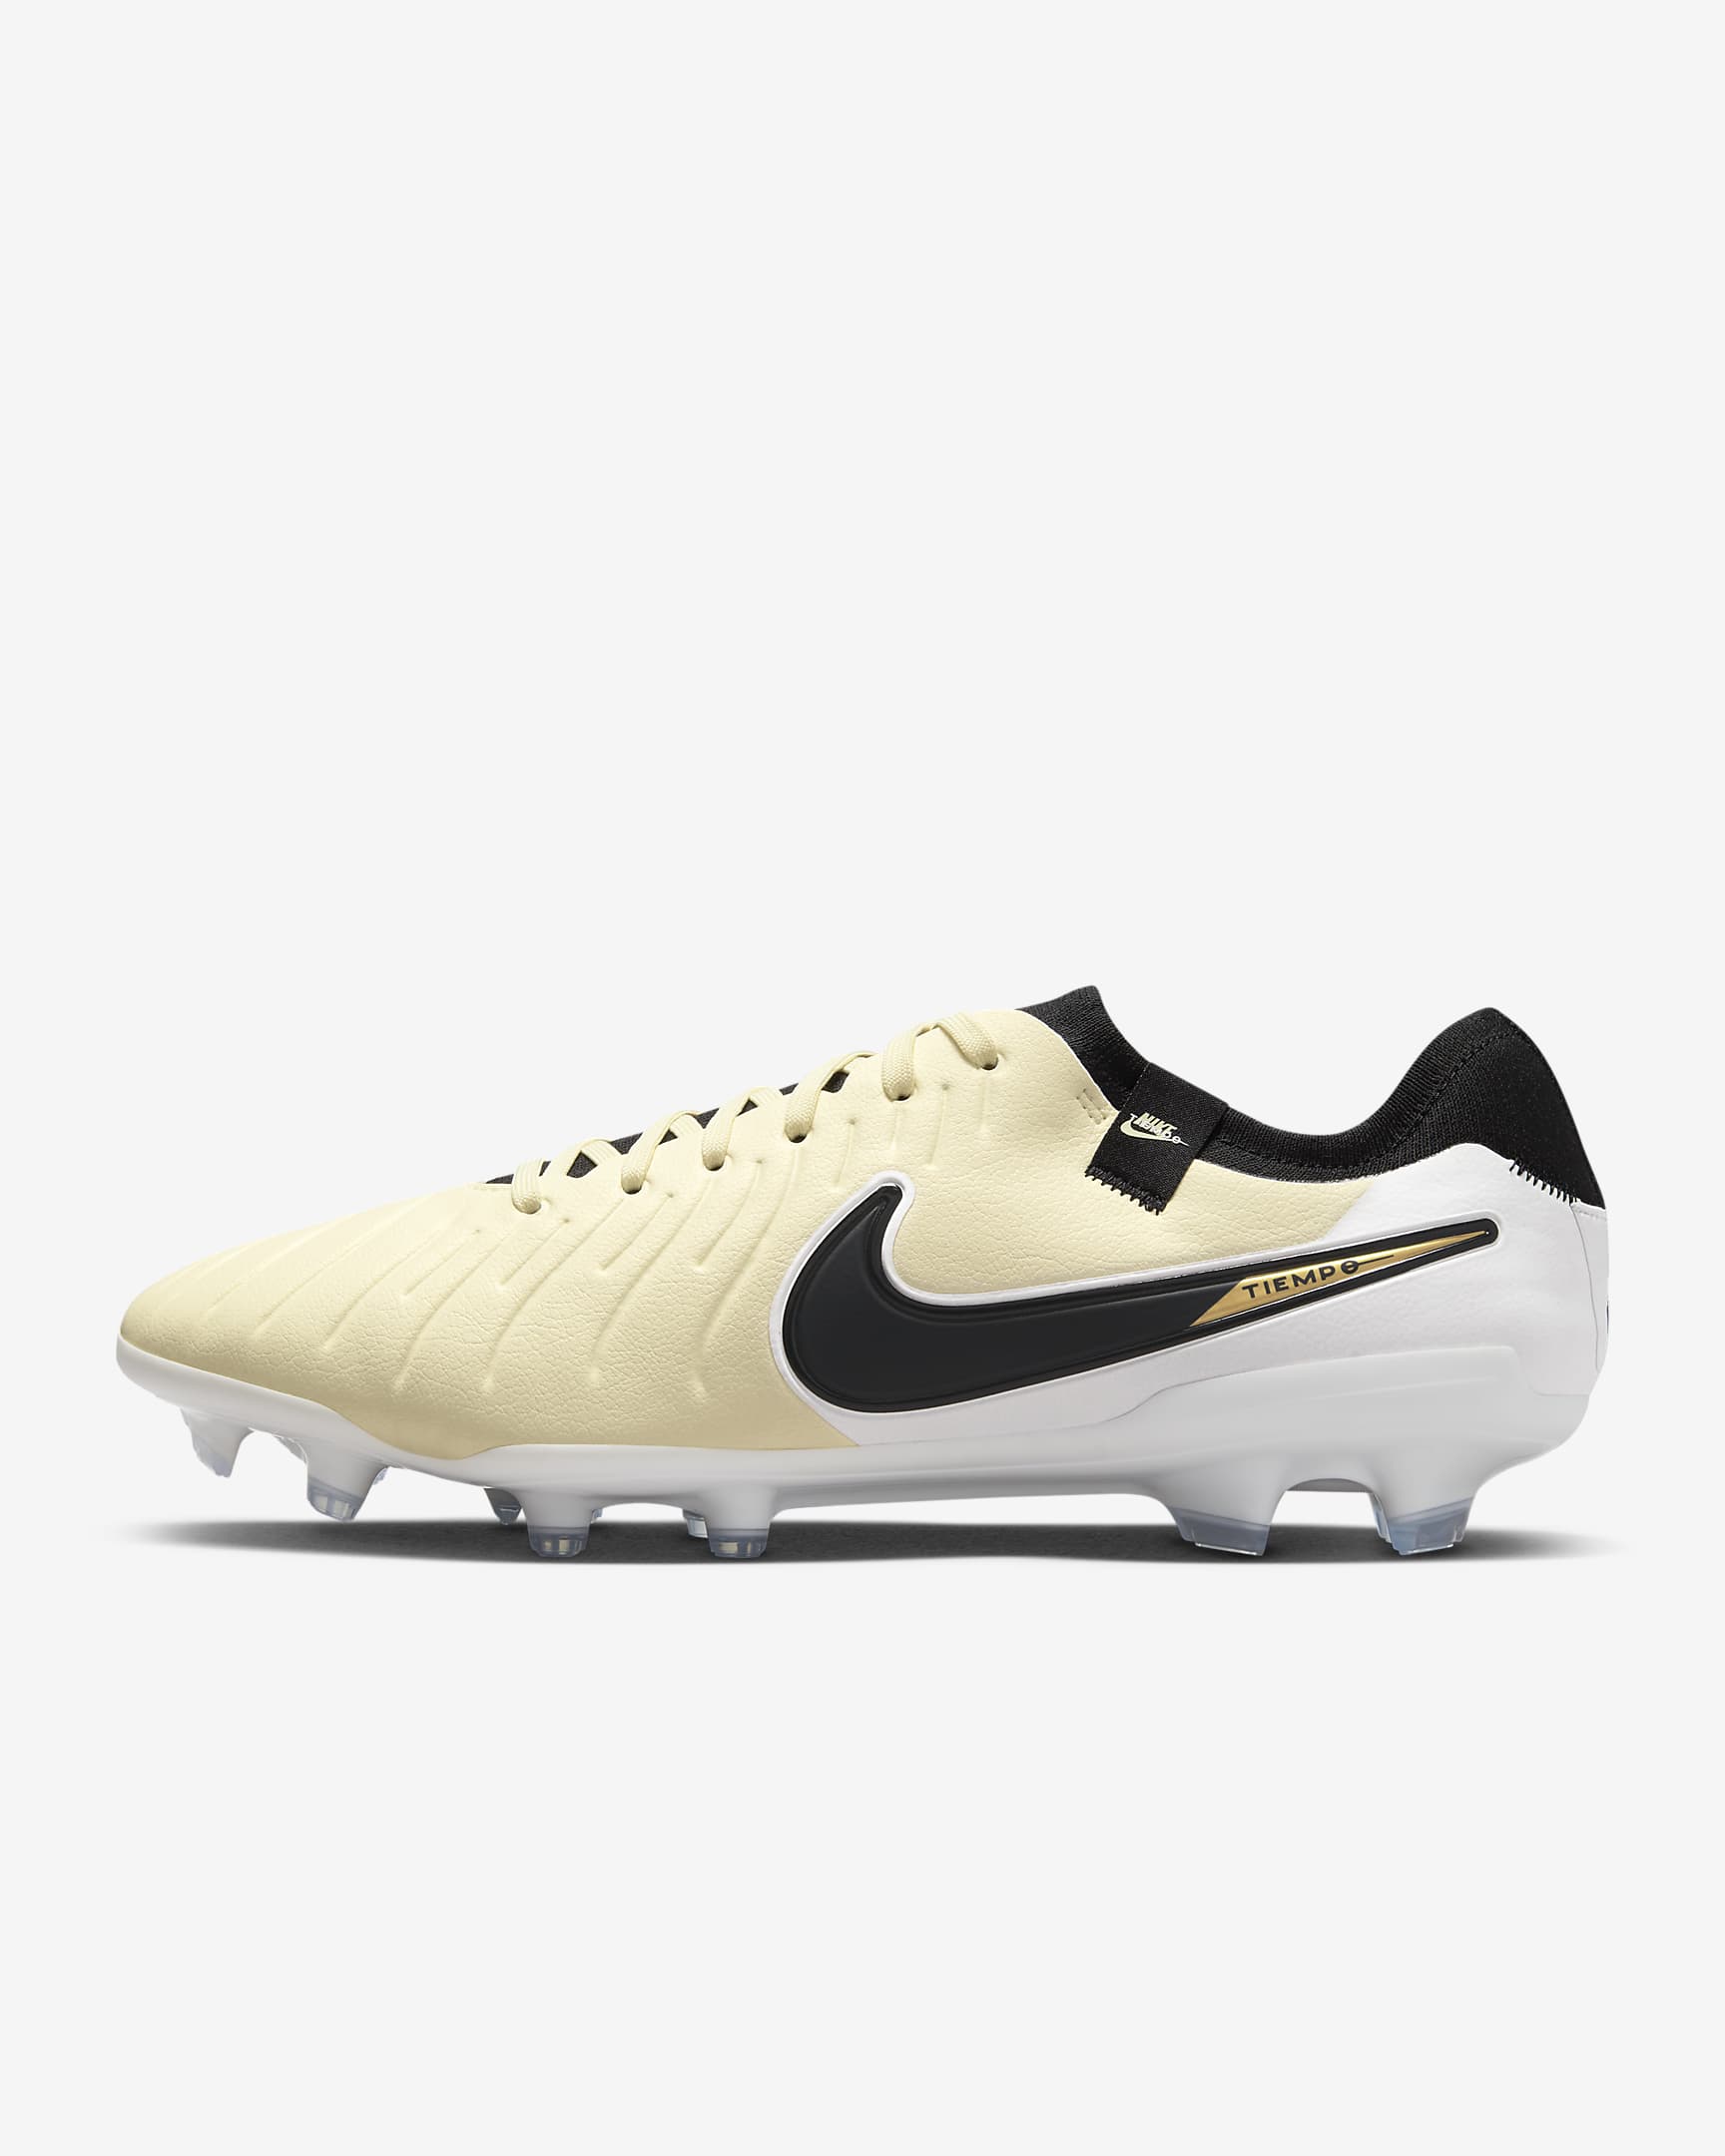 Nike Tiempo Legend 10 Pro Firm-Ground Low-Top Football Boot. Nike DK